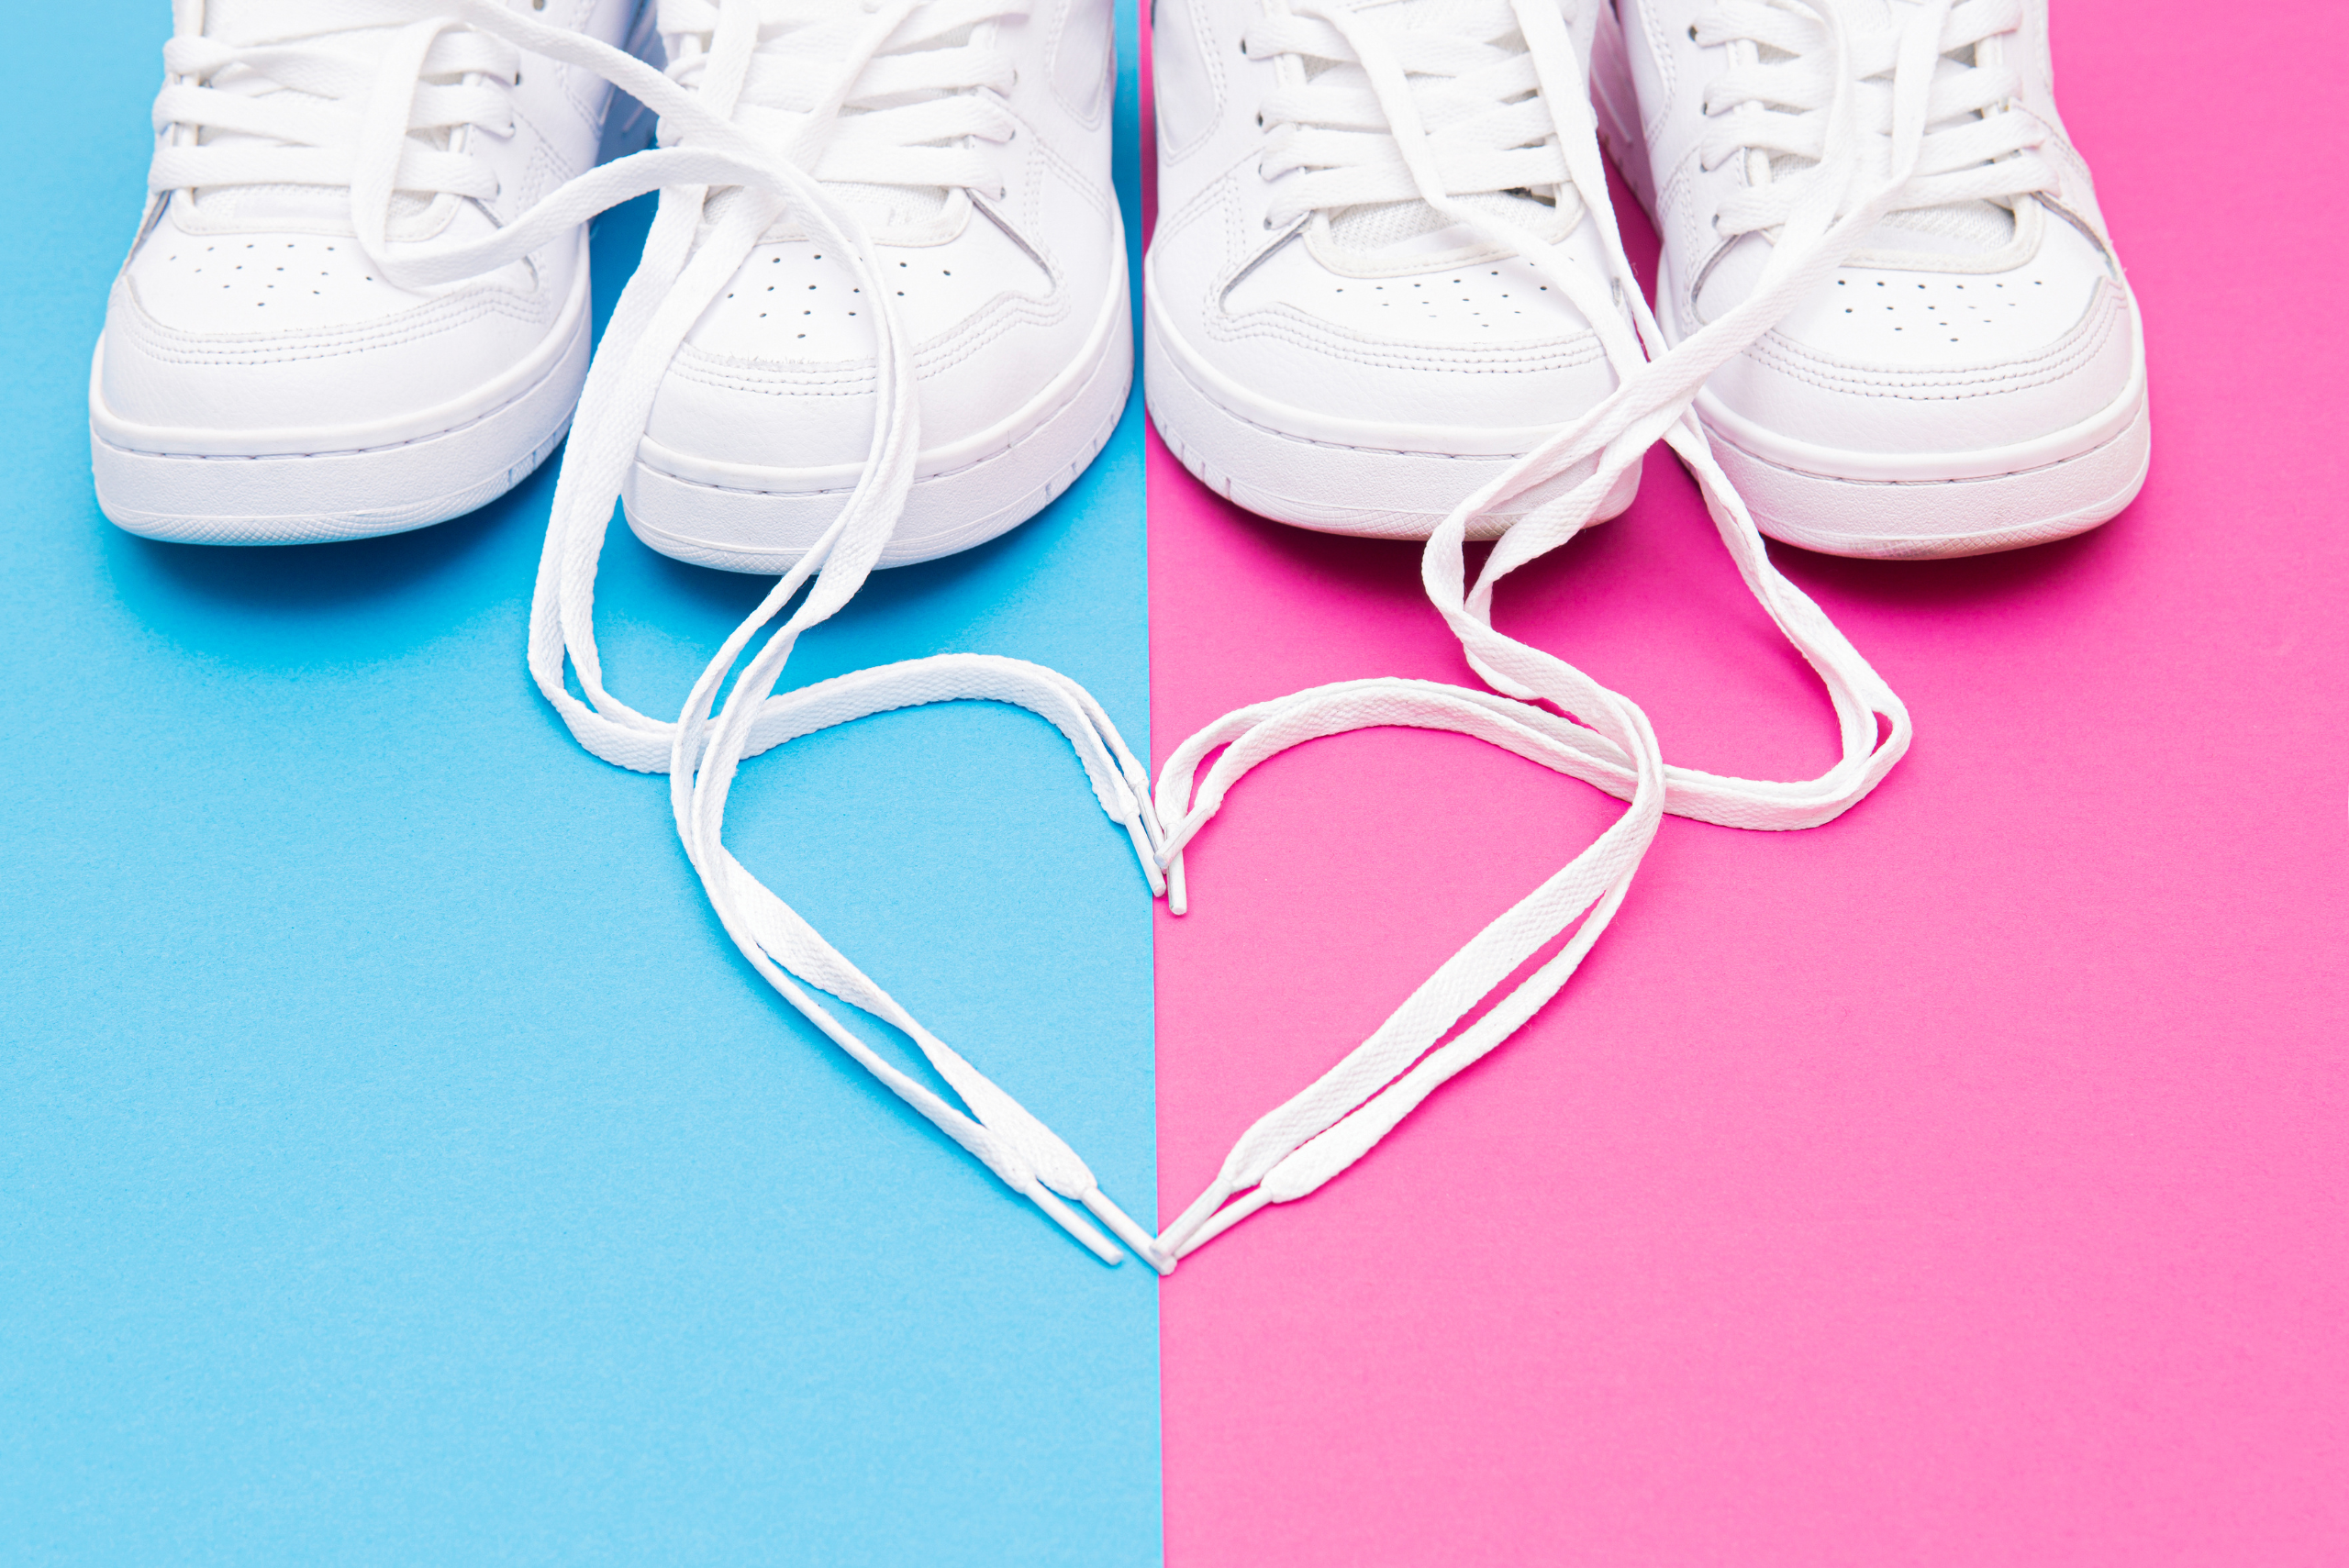 sneakers with shoe laces making a heart